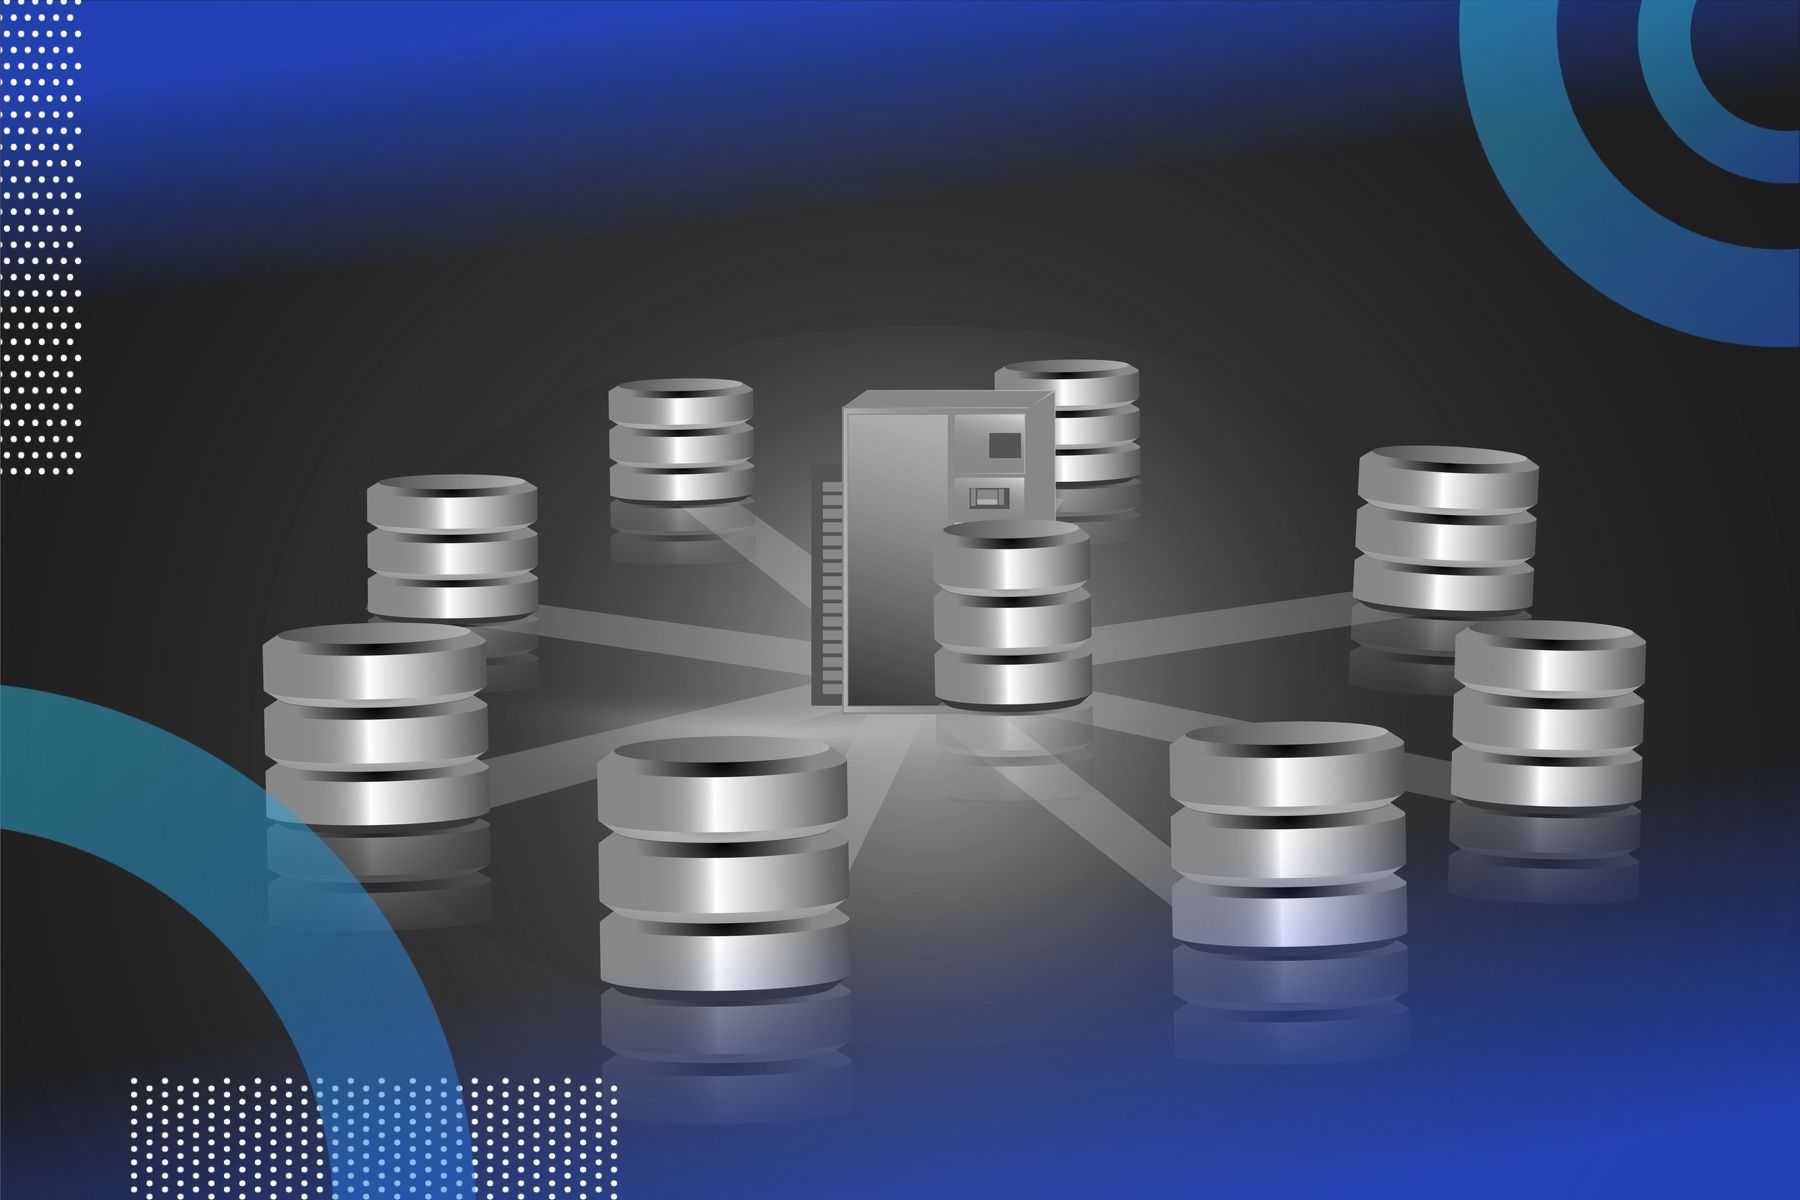 Data Warehouses and Transactional Databases: What’s the Difference?